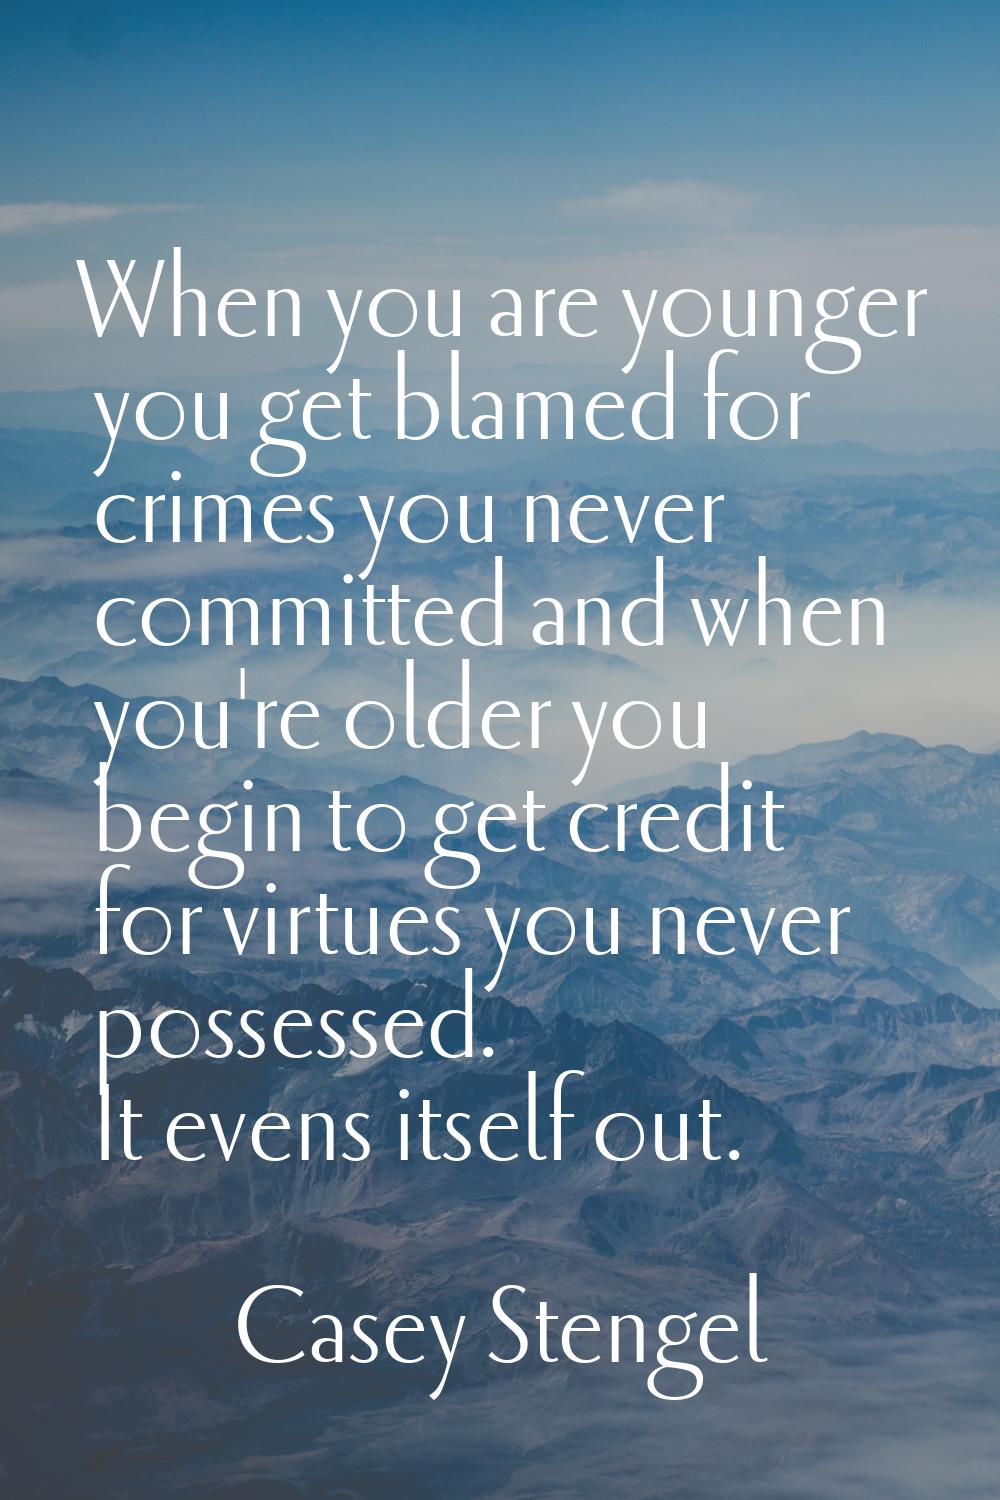 When you are younger you get blamed for crimes you never committed and when you're older you begin 